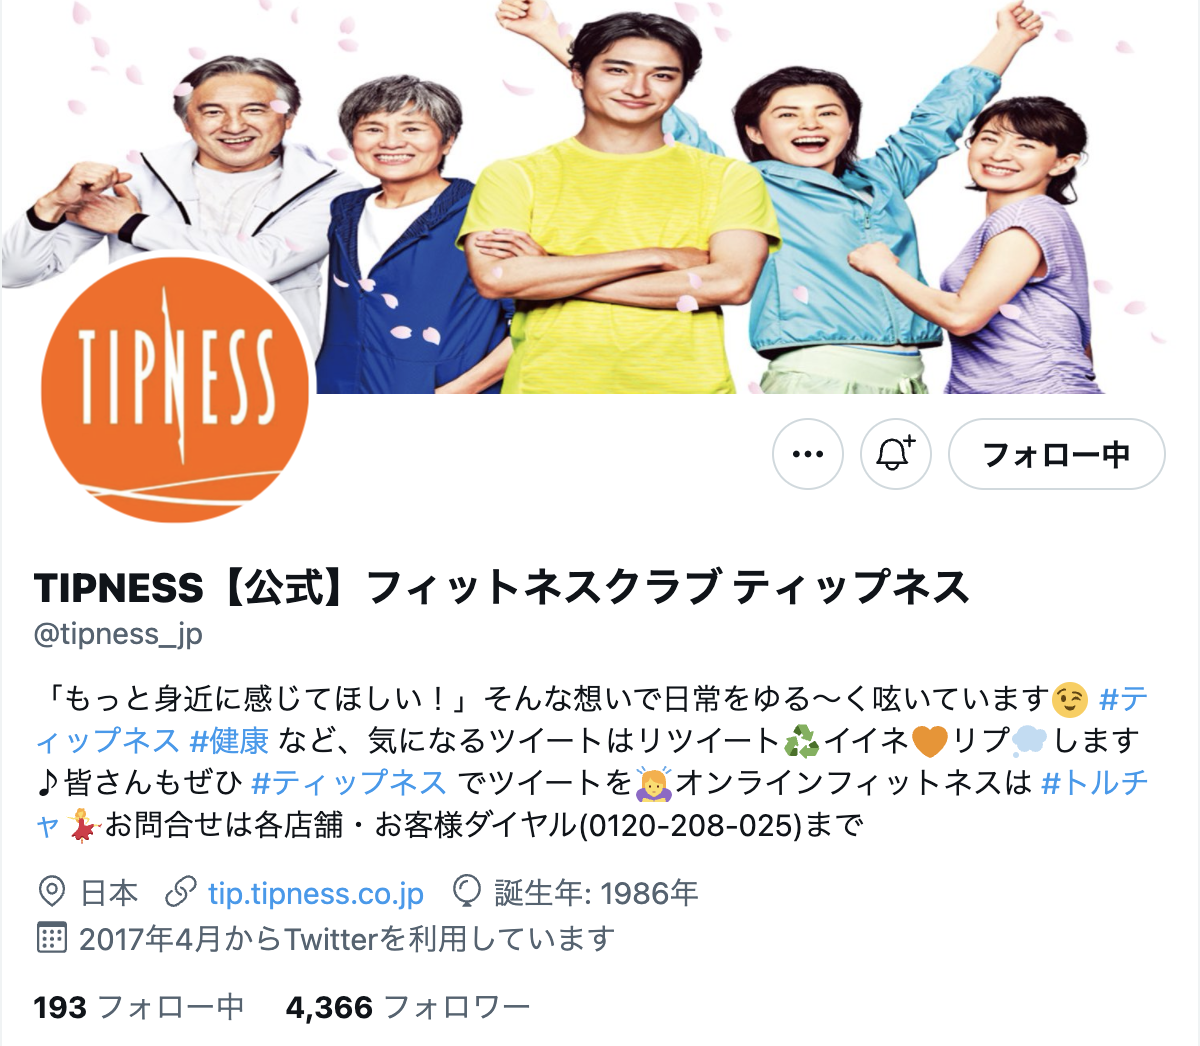 twitter-official-account-fitness-tipness